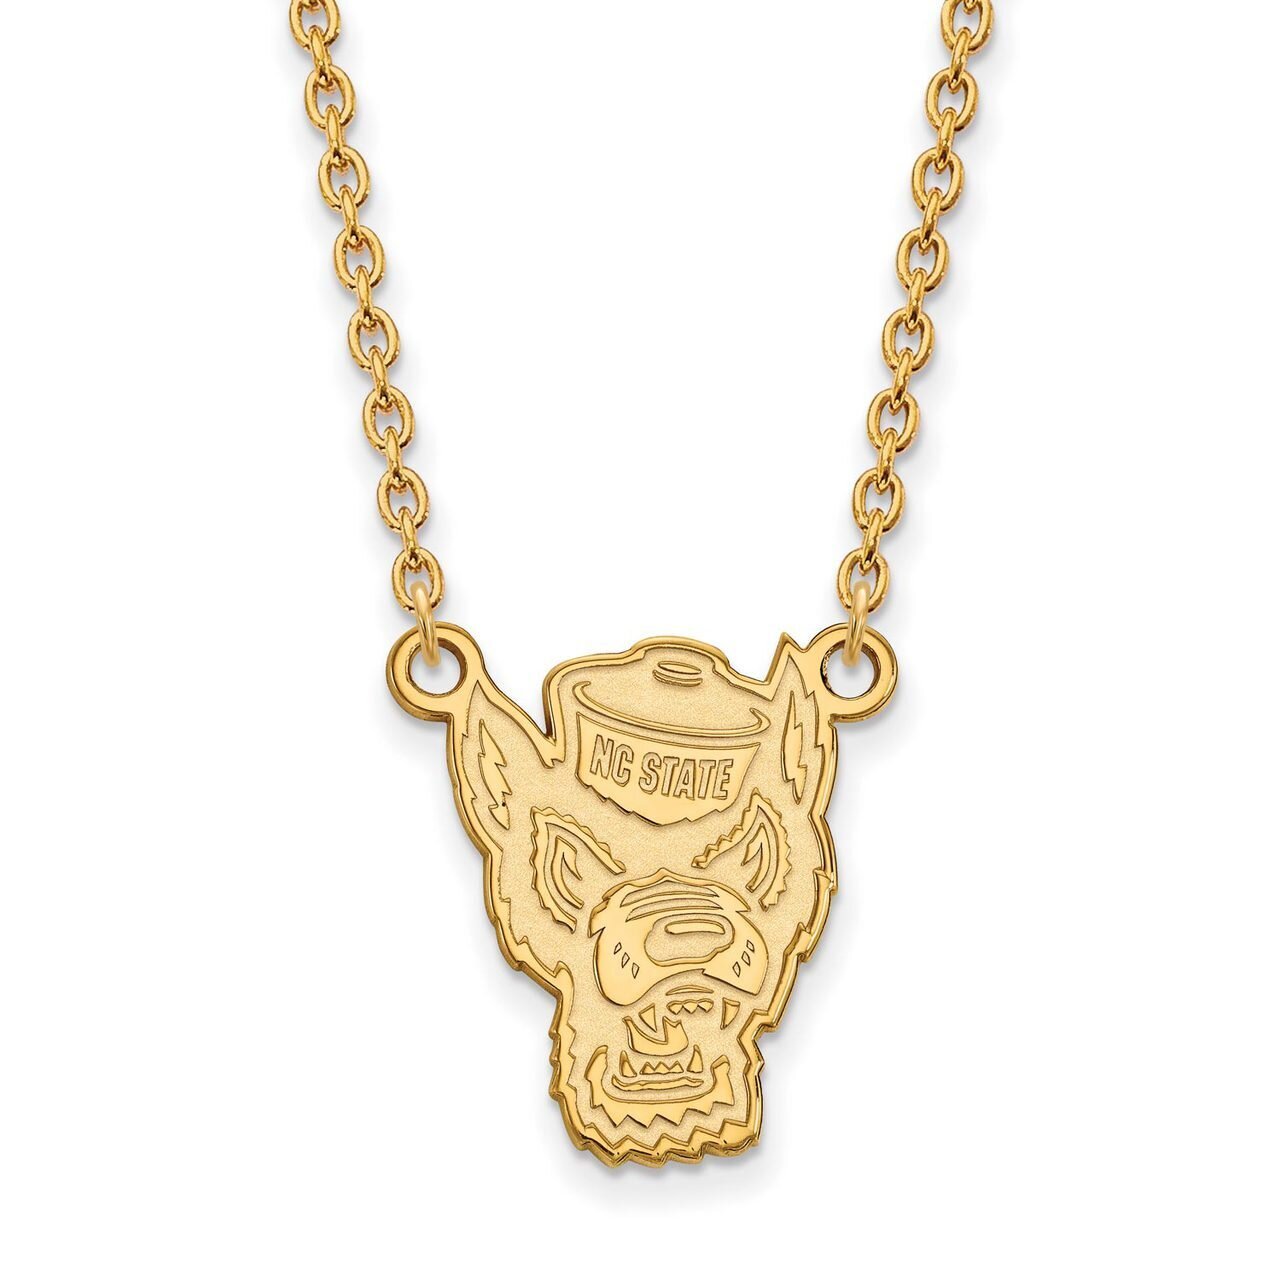 North Carolina State University Large Pendant with Chain Necklace 10k Yellow Gold 1Y057NCS-18